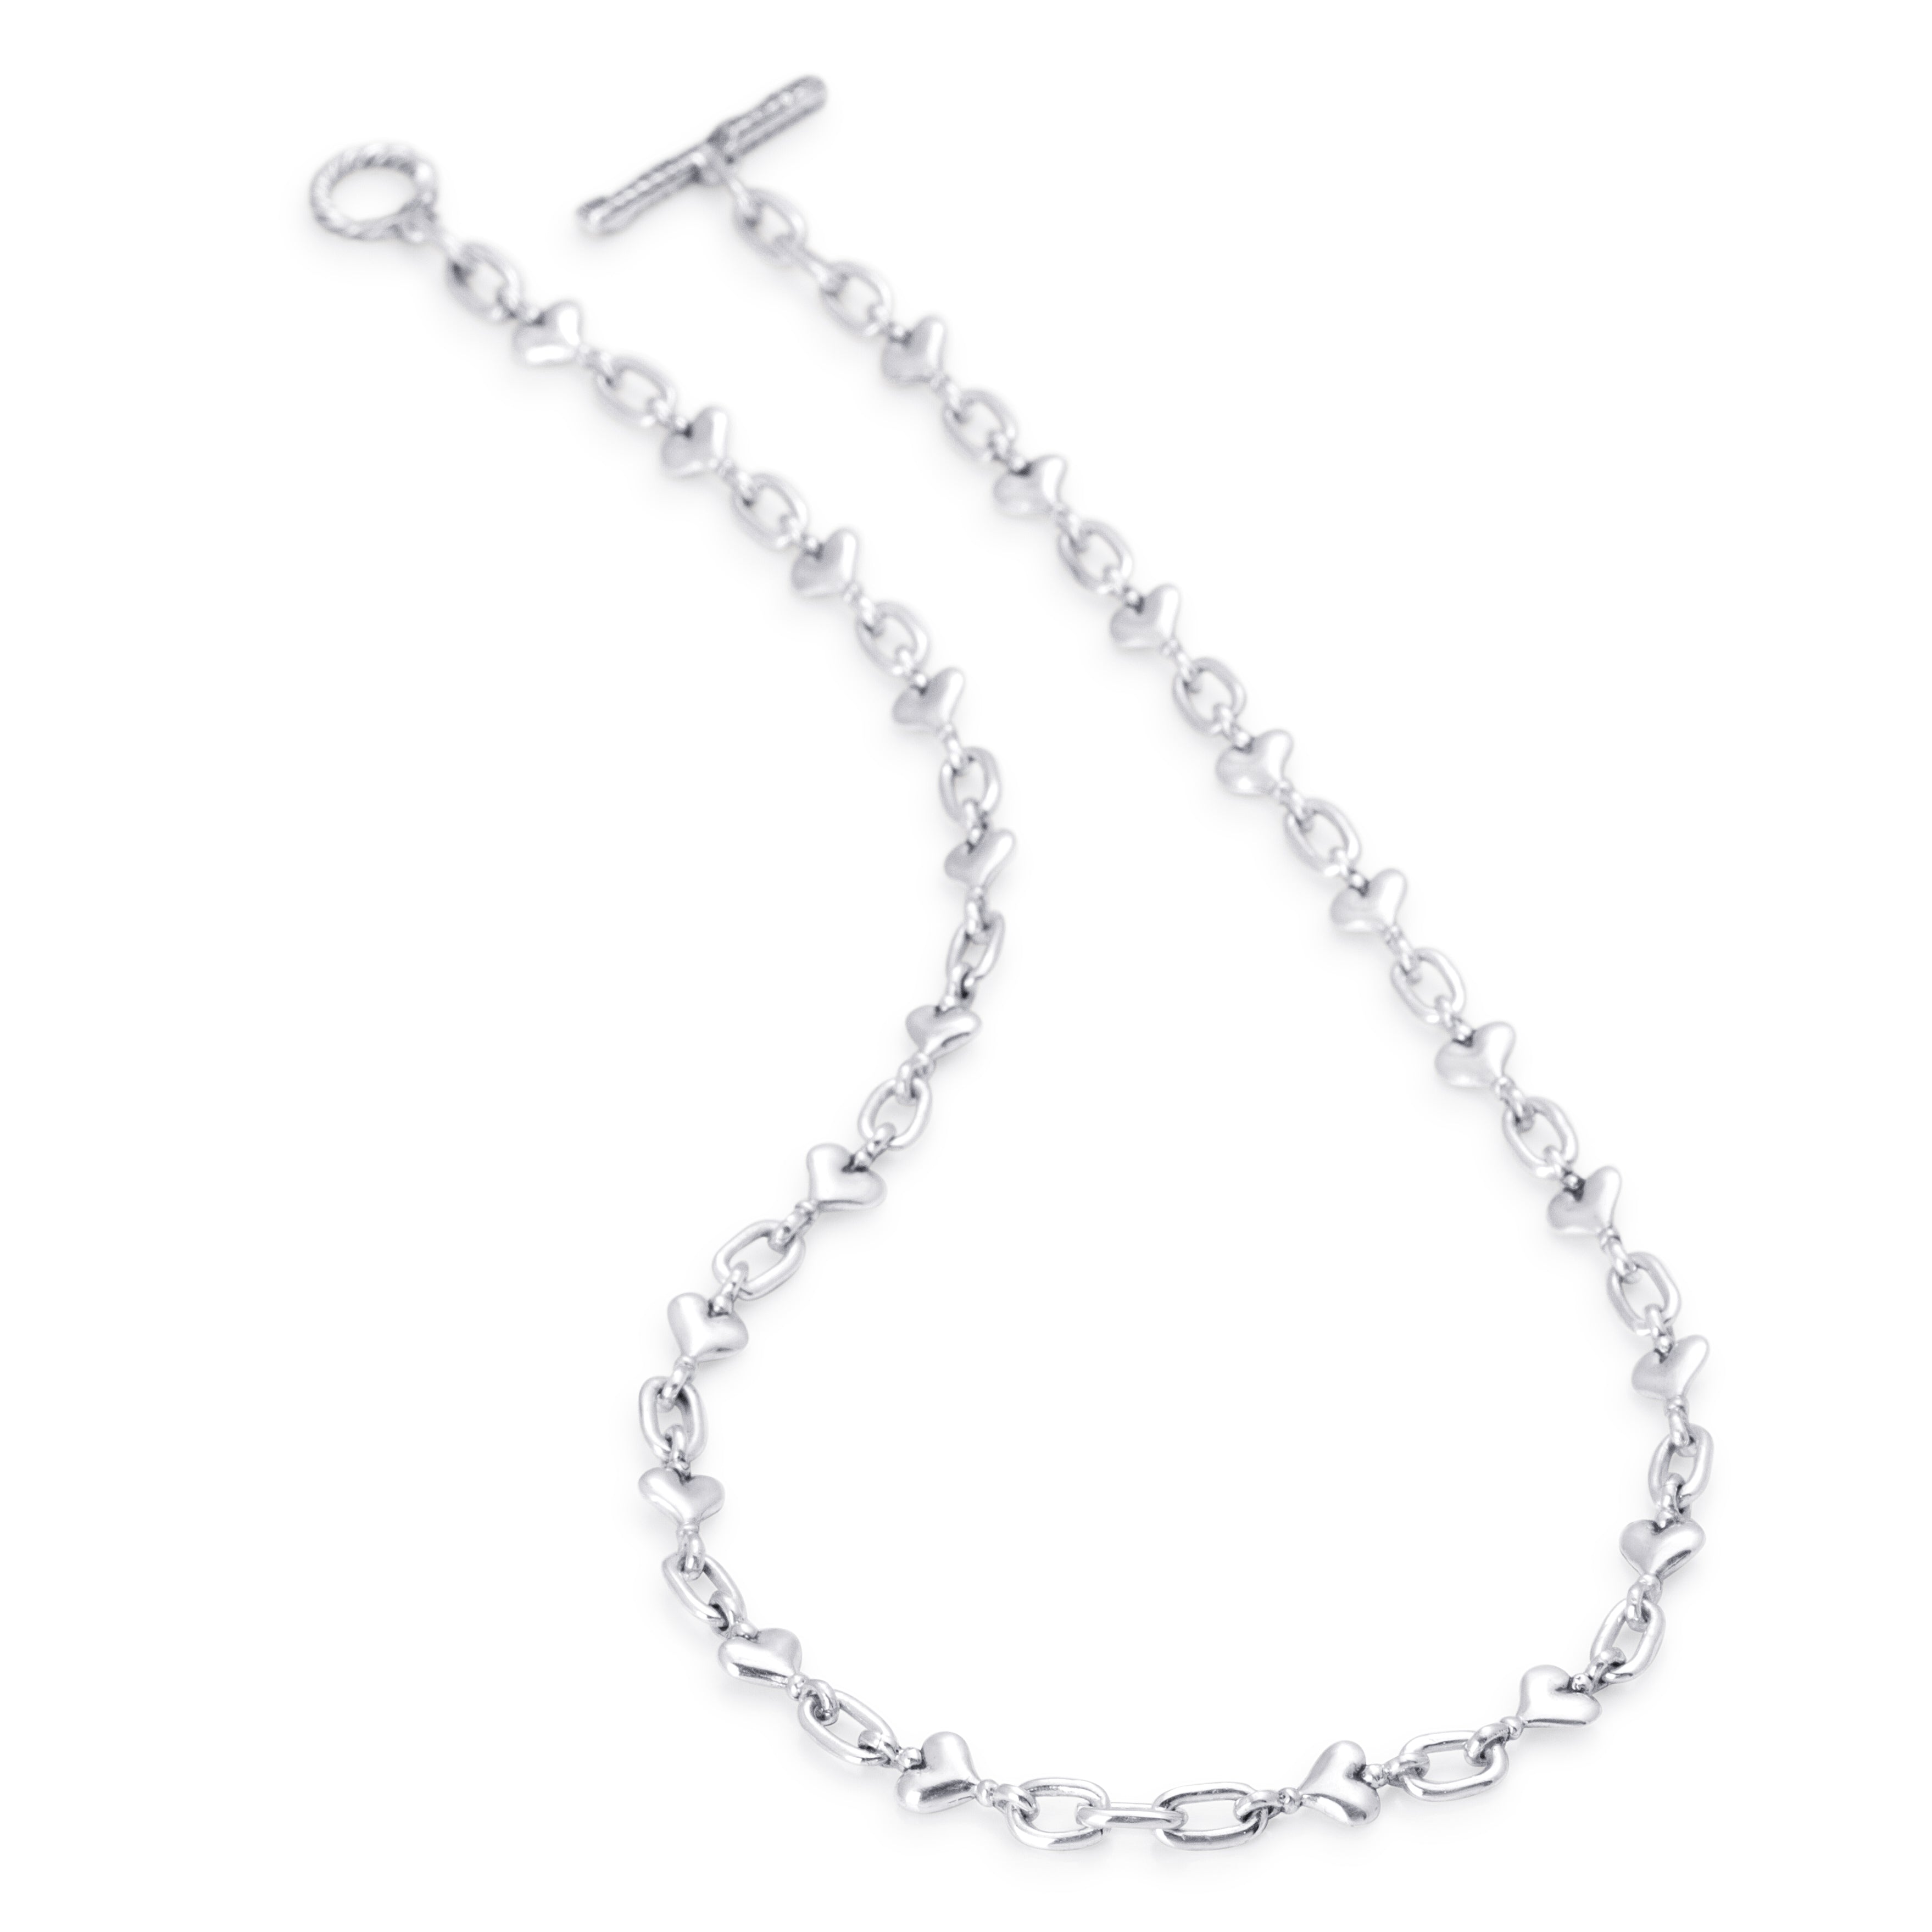 Solid Sterling Silver petite heart links joined with classic open links, T-toggle clasp 